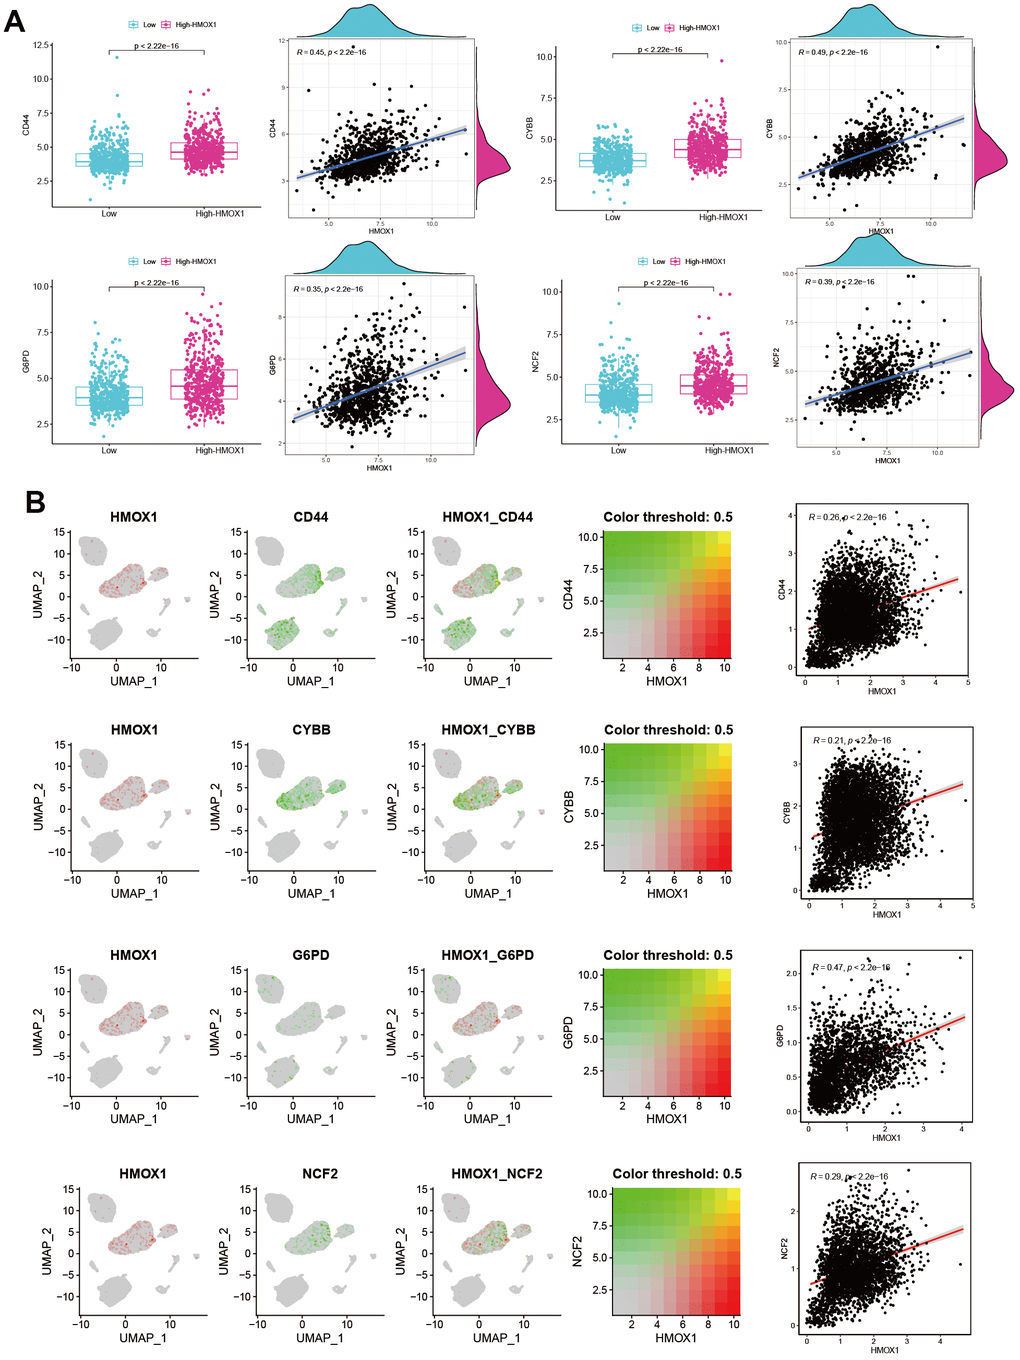 HMOX1 and Ferroptosis in liver cancer (A) Ferroptosis promoting genes were strongly correlated with HMOX1 based on RNA-seq. (B) Ferroptosis promoting genes were strongly correlated with HMOX1 in liver cancer microenvironment.